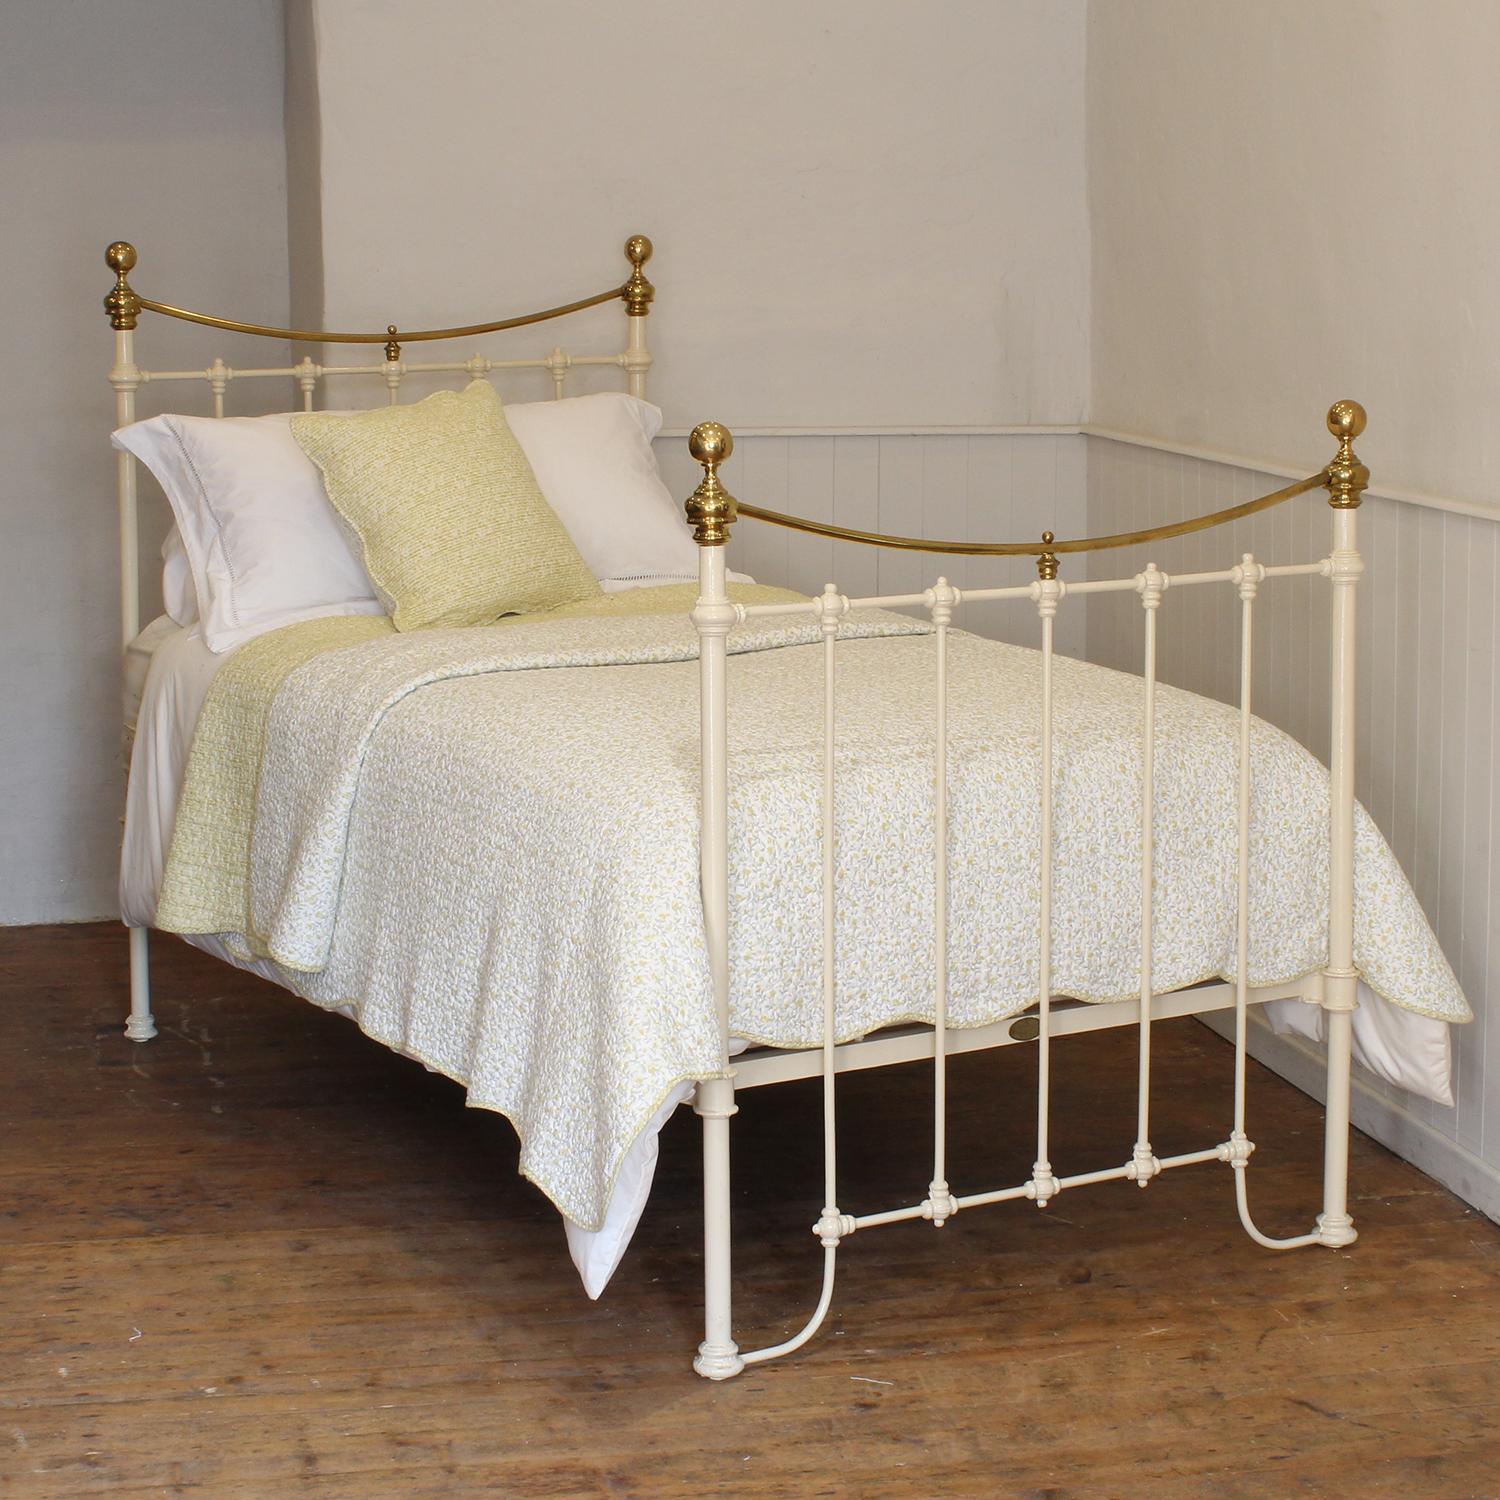 A traditional style Victorian antique bed painted in cream, with curved brass top rails.
This bed takes a large single 3ft 6in wide x 6ft 3in long base and mattress.
The price includes a firm base.
The mattress, bedding and bed linen are not